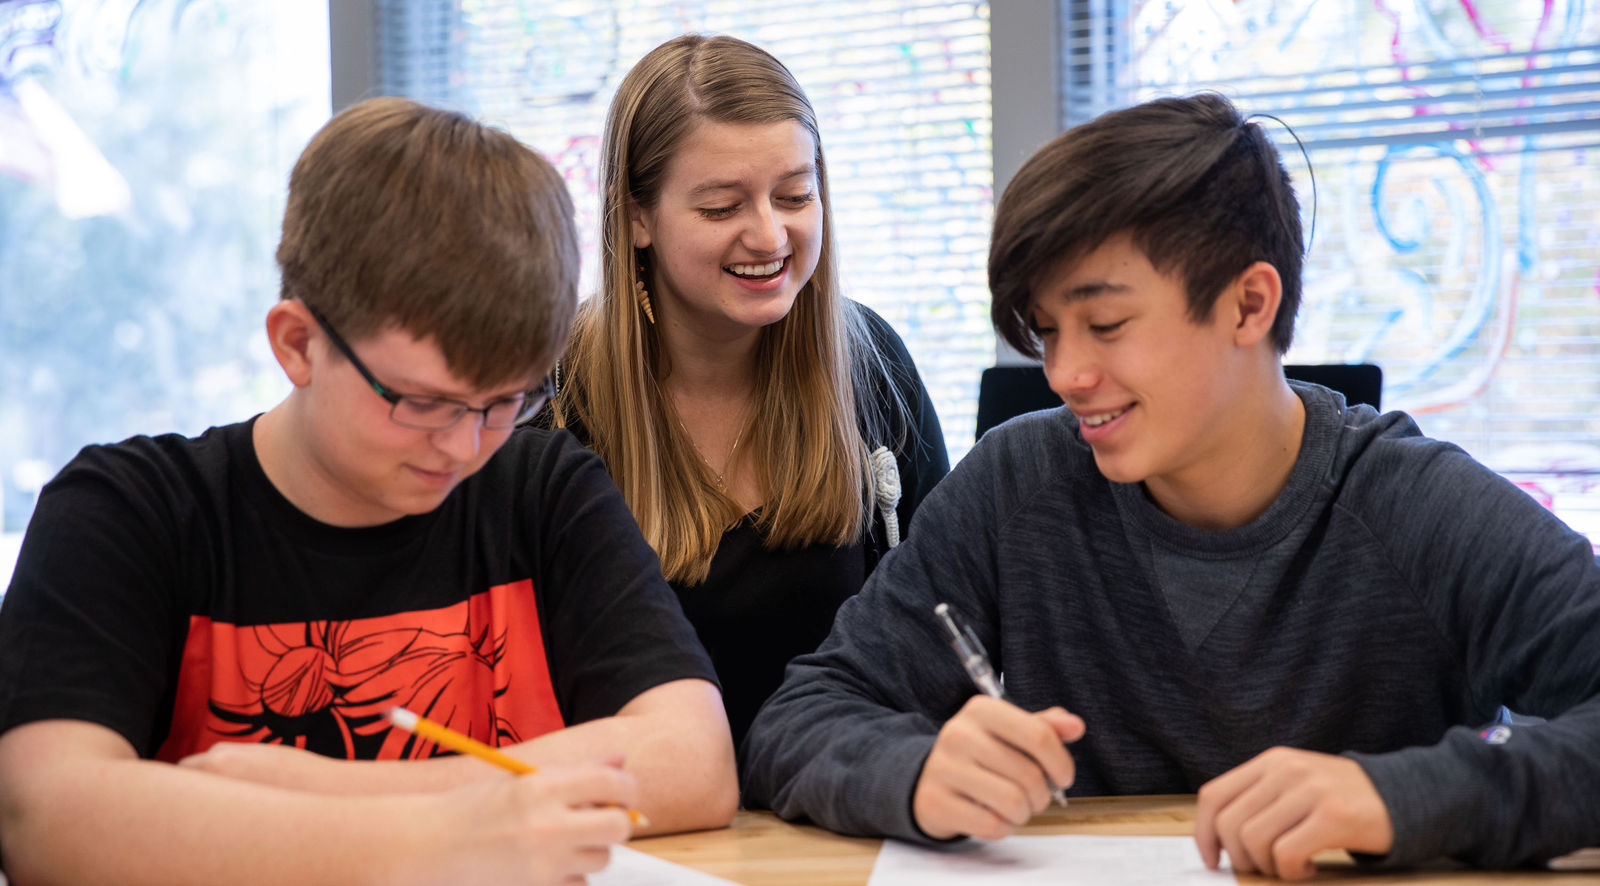 A mentor smiles with two students working at a table.